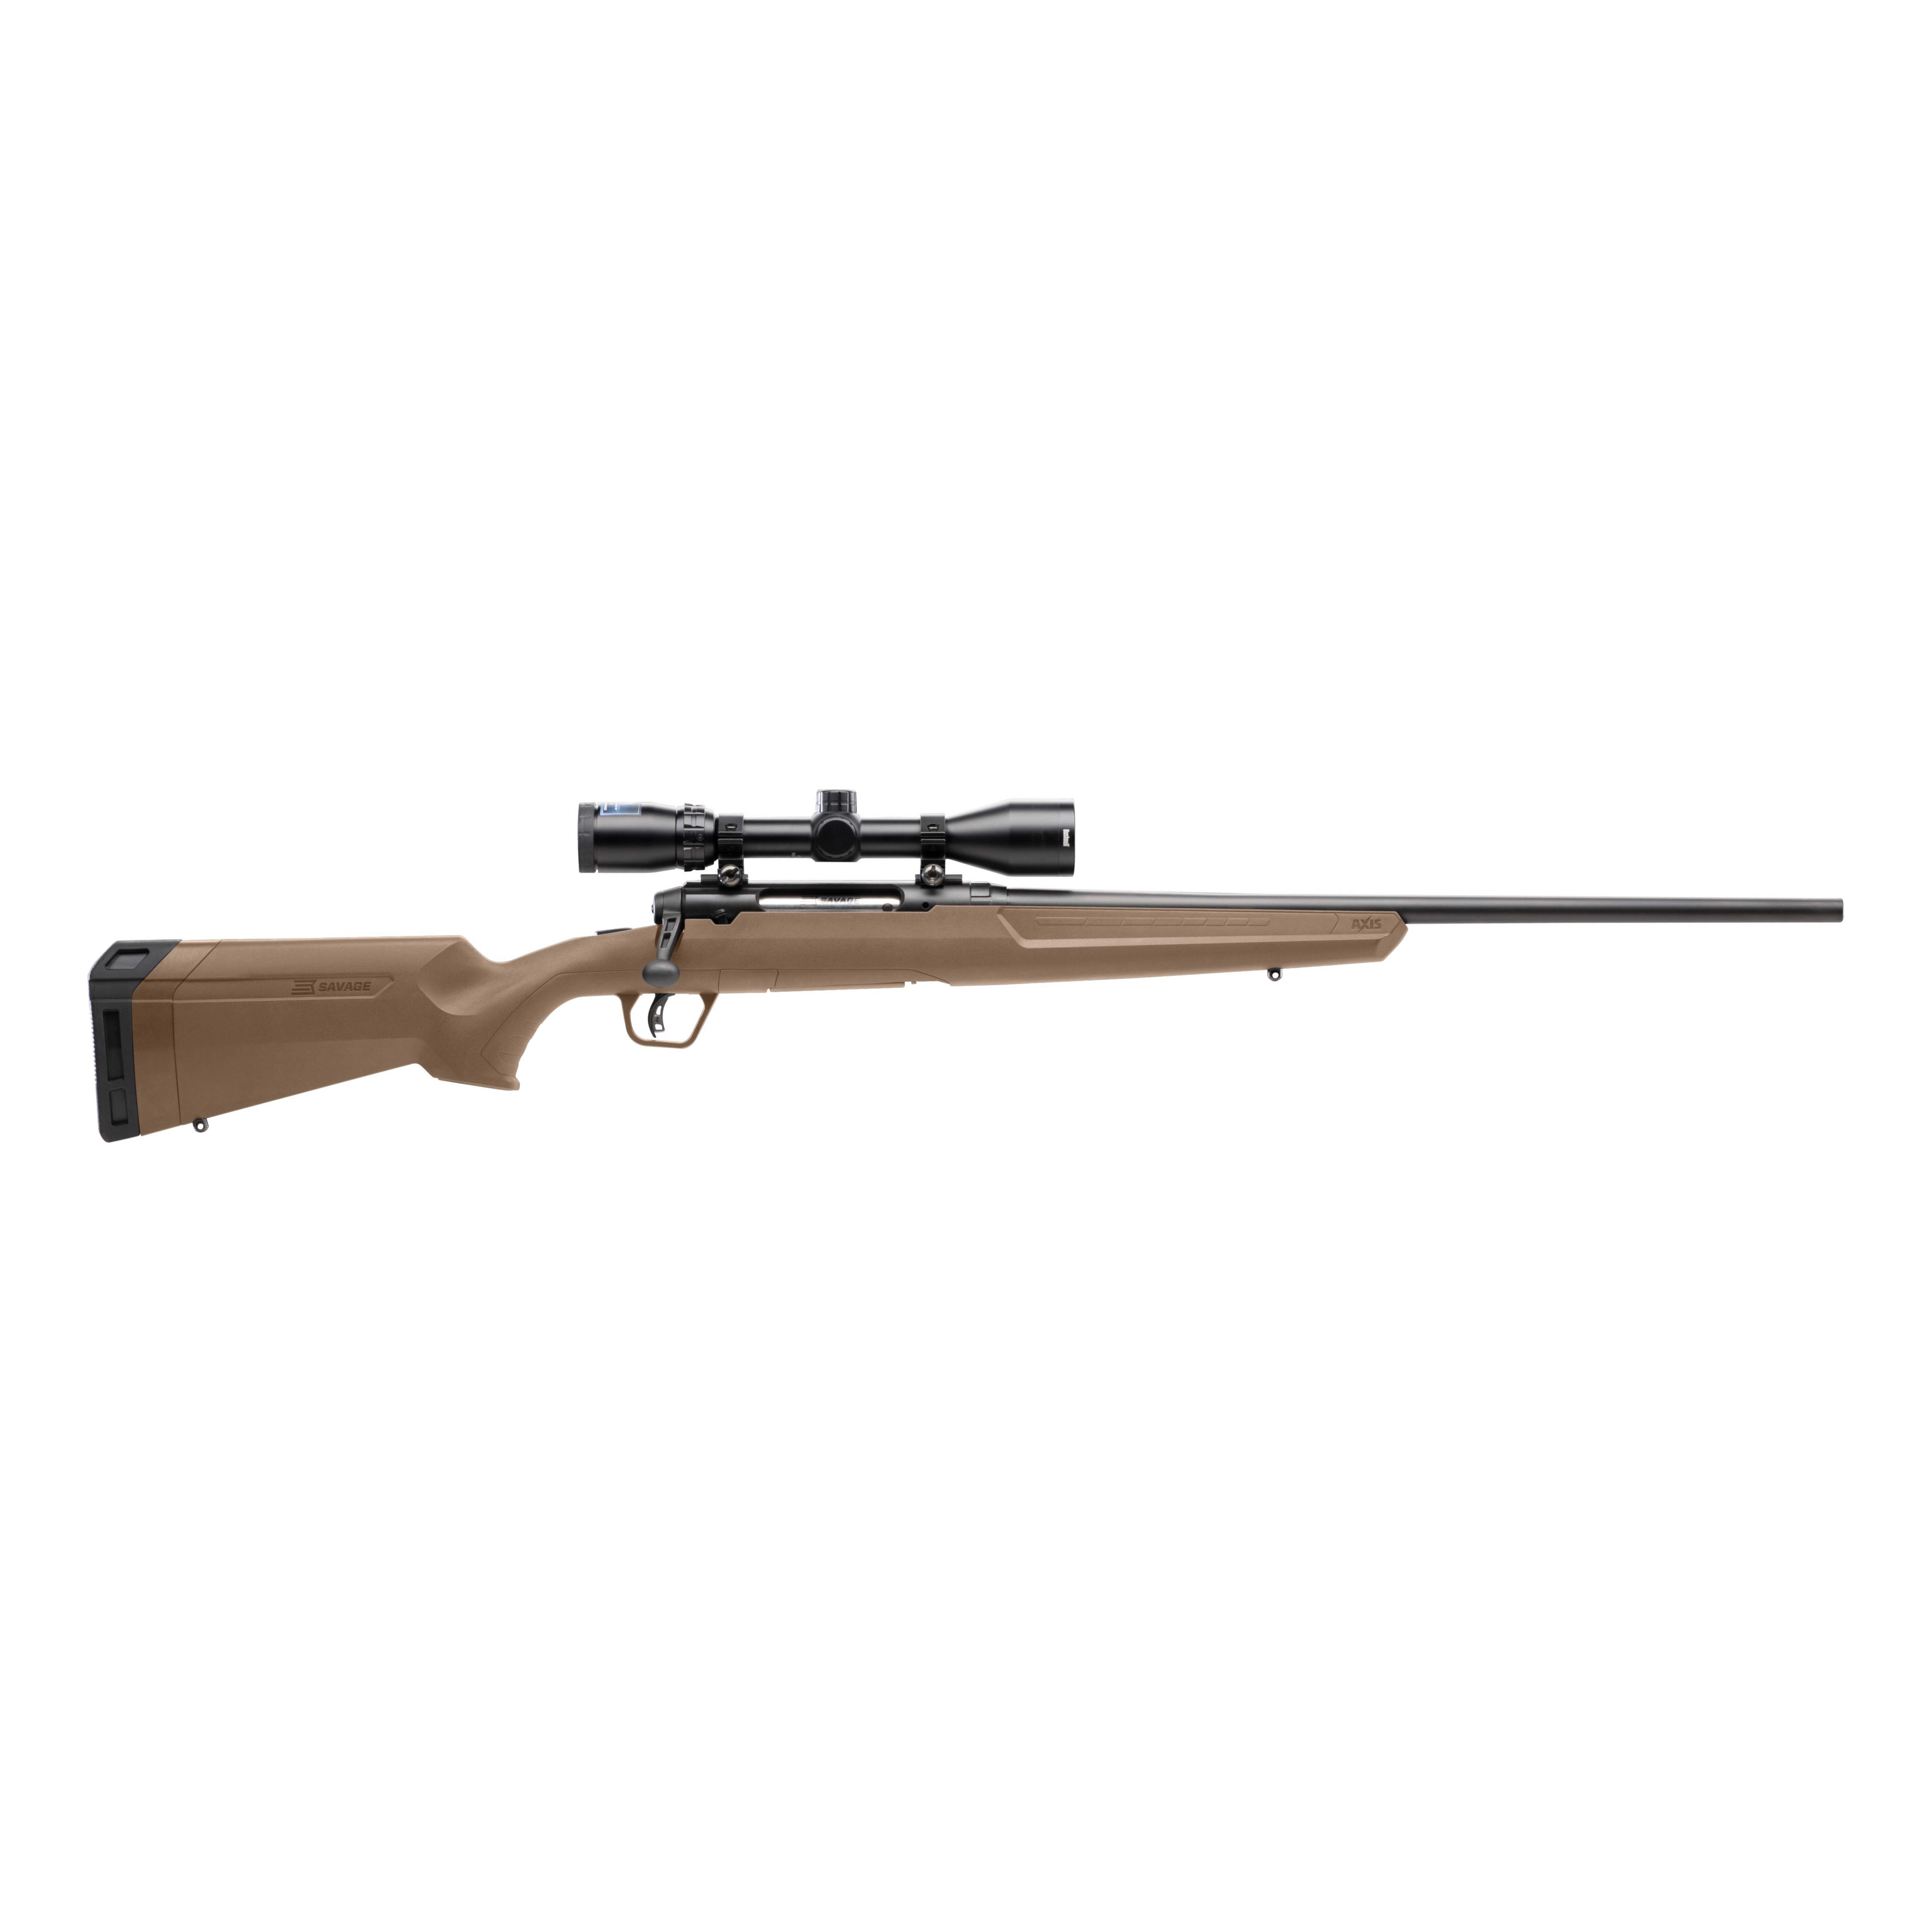 Savage® AXIS II XP Bolt-Action Rifle with Scope in Flat Dark Earth